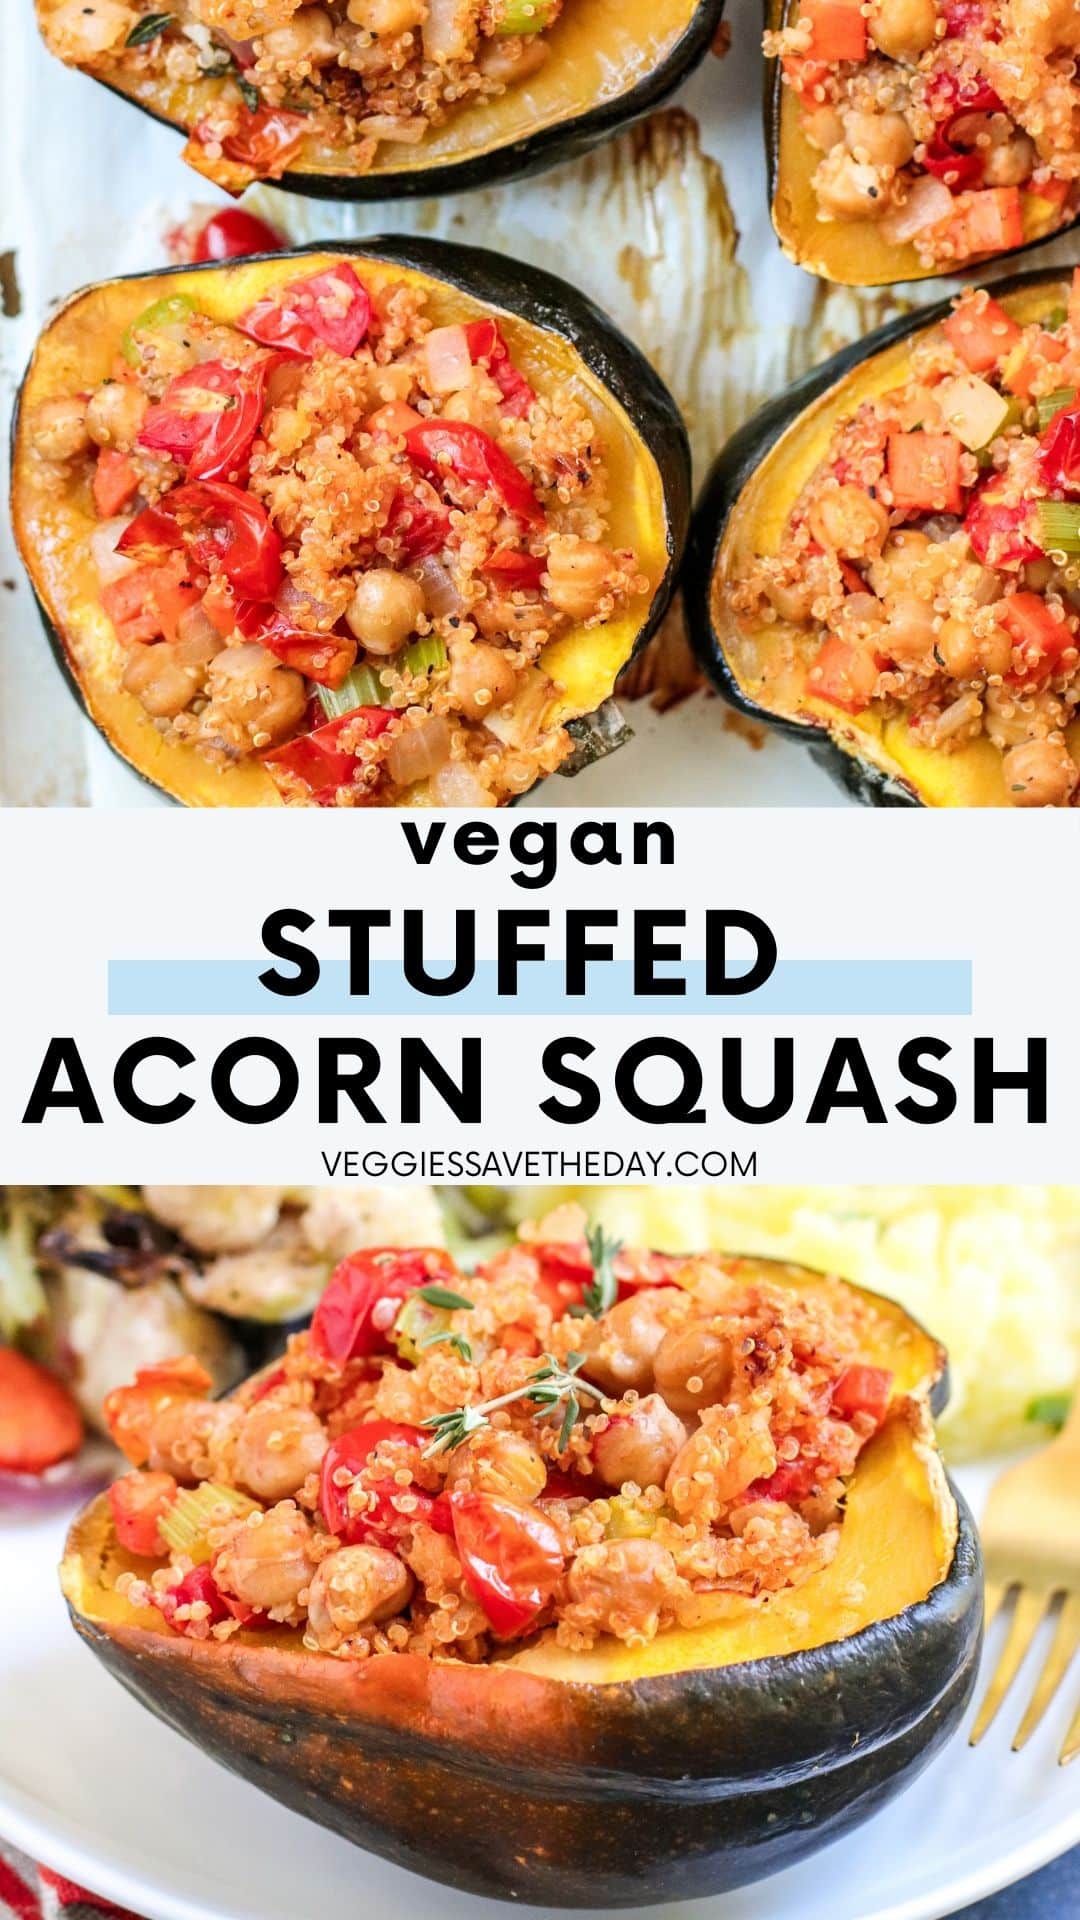 Quinoa stuffed acorn squash halves on a sheet pan and on a dinner plate with roasted vegetables and mashed potatoes.